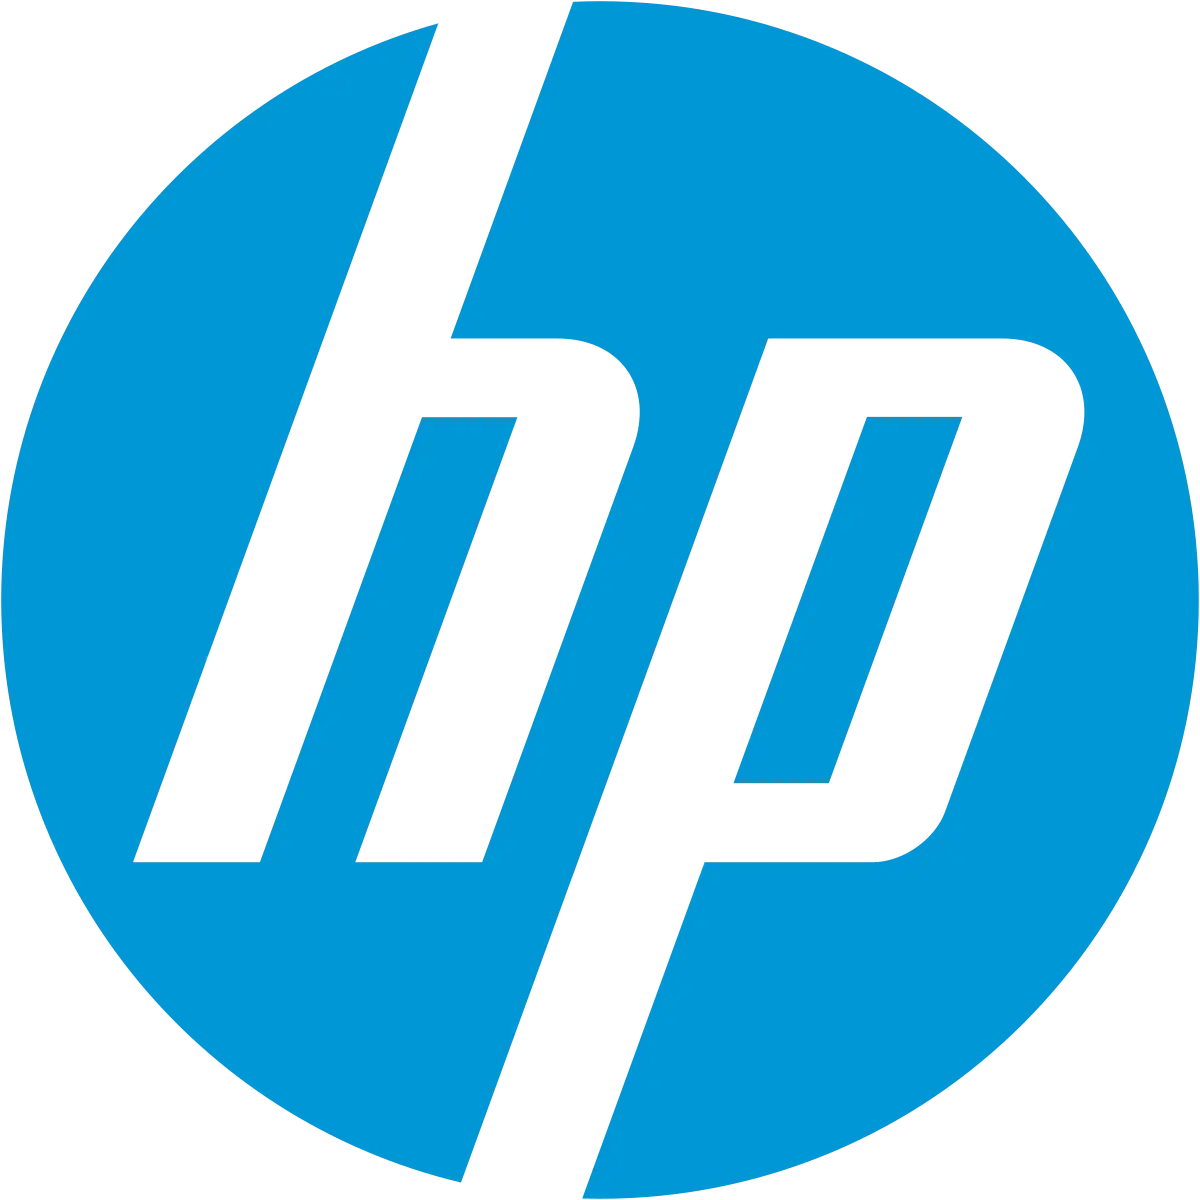 Hewlett packard agency of record: importance and benefits